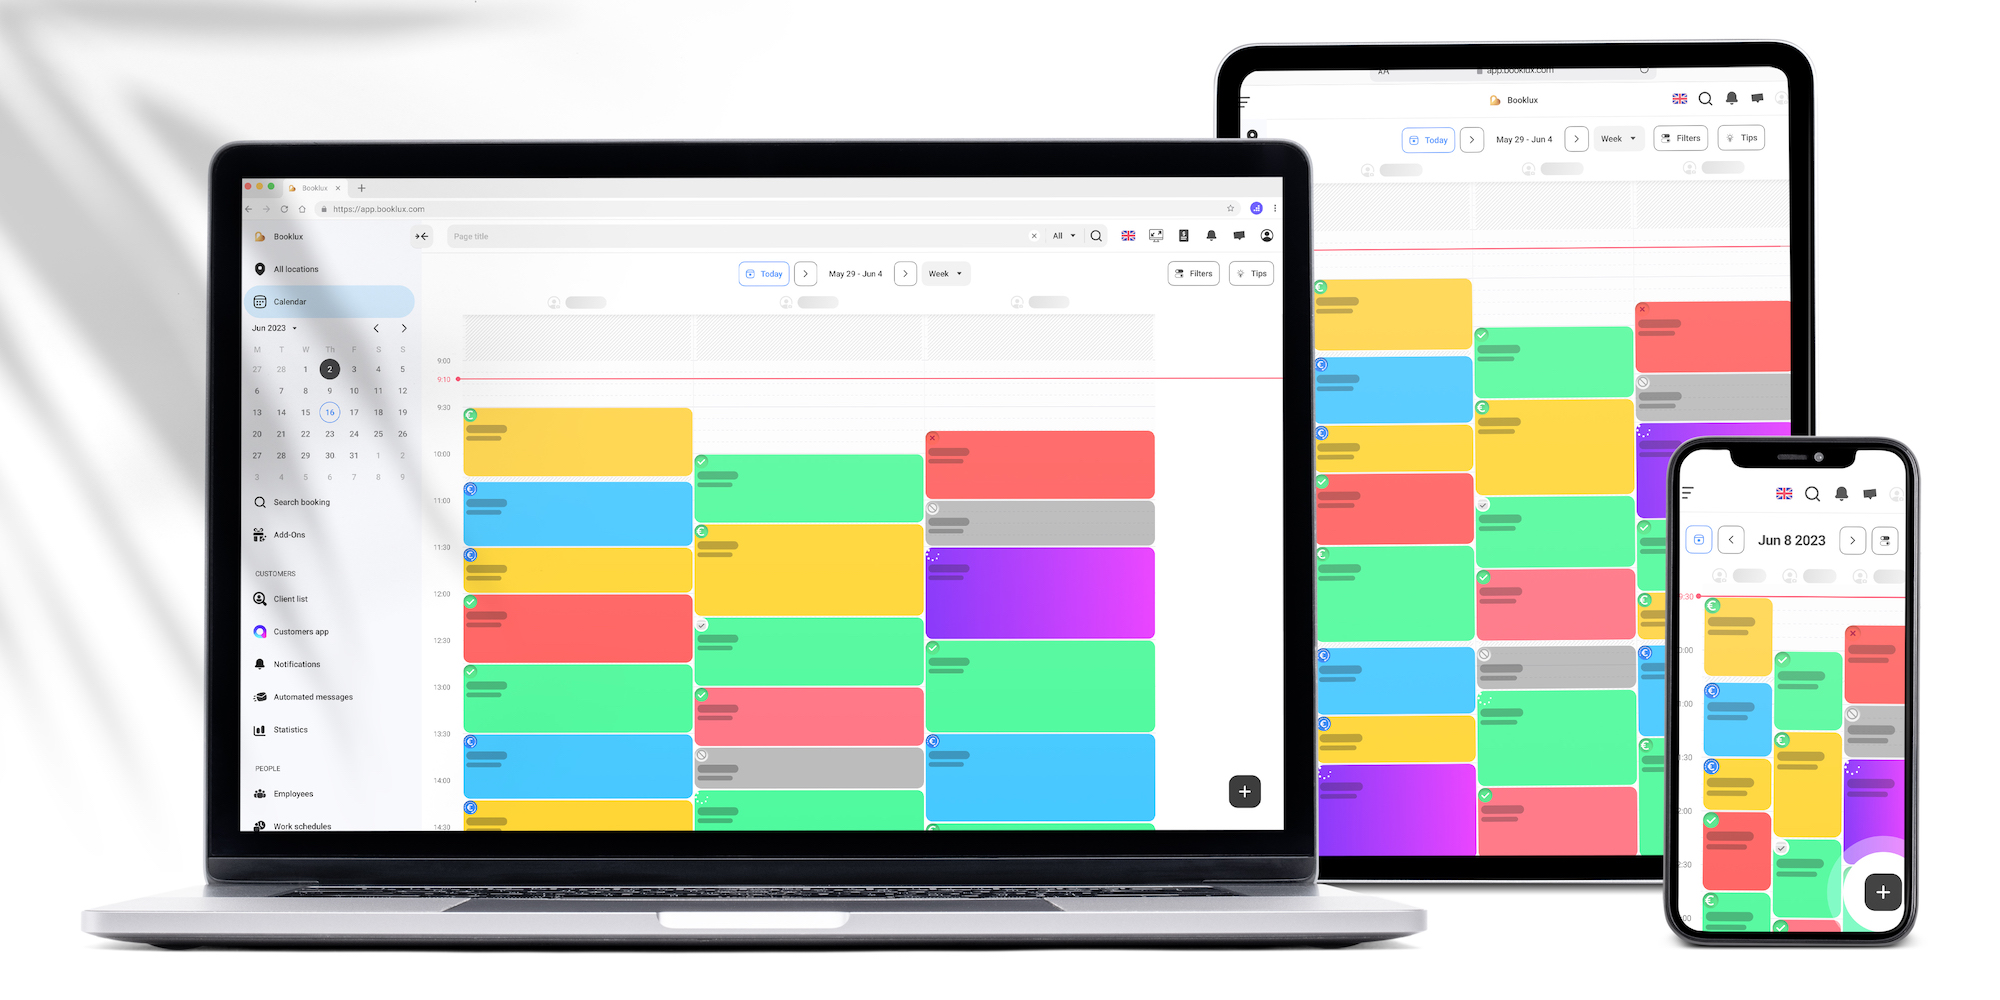 Booklux's appointment scheduling software works seamlessly and securely with Windows, macOS, iOS and Android devices.